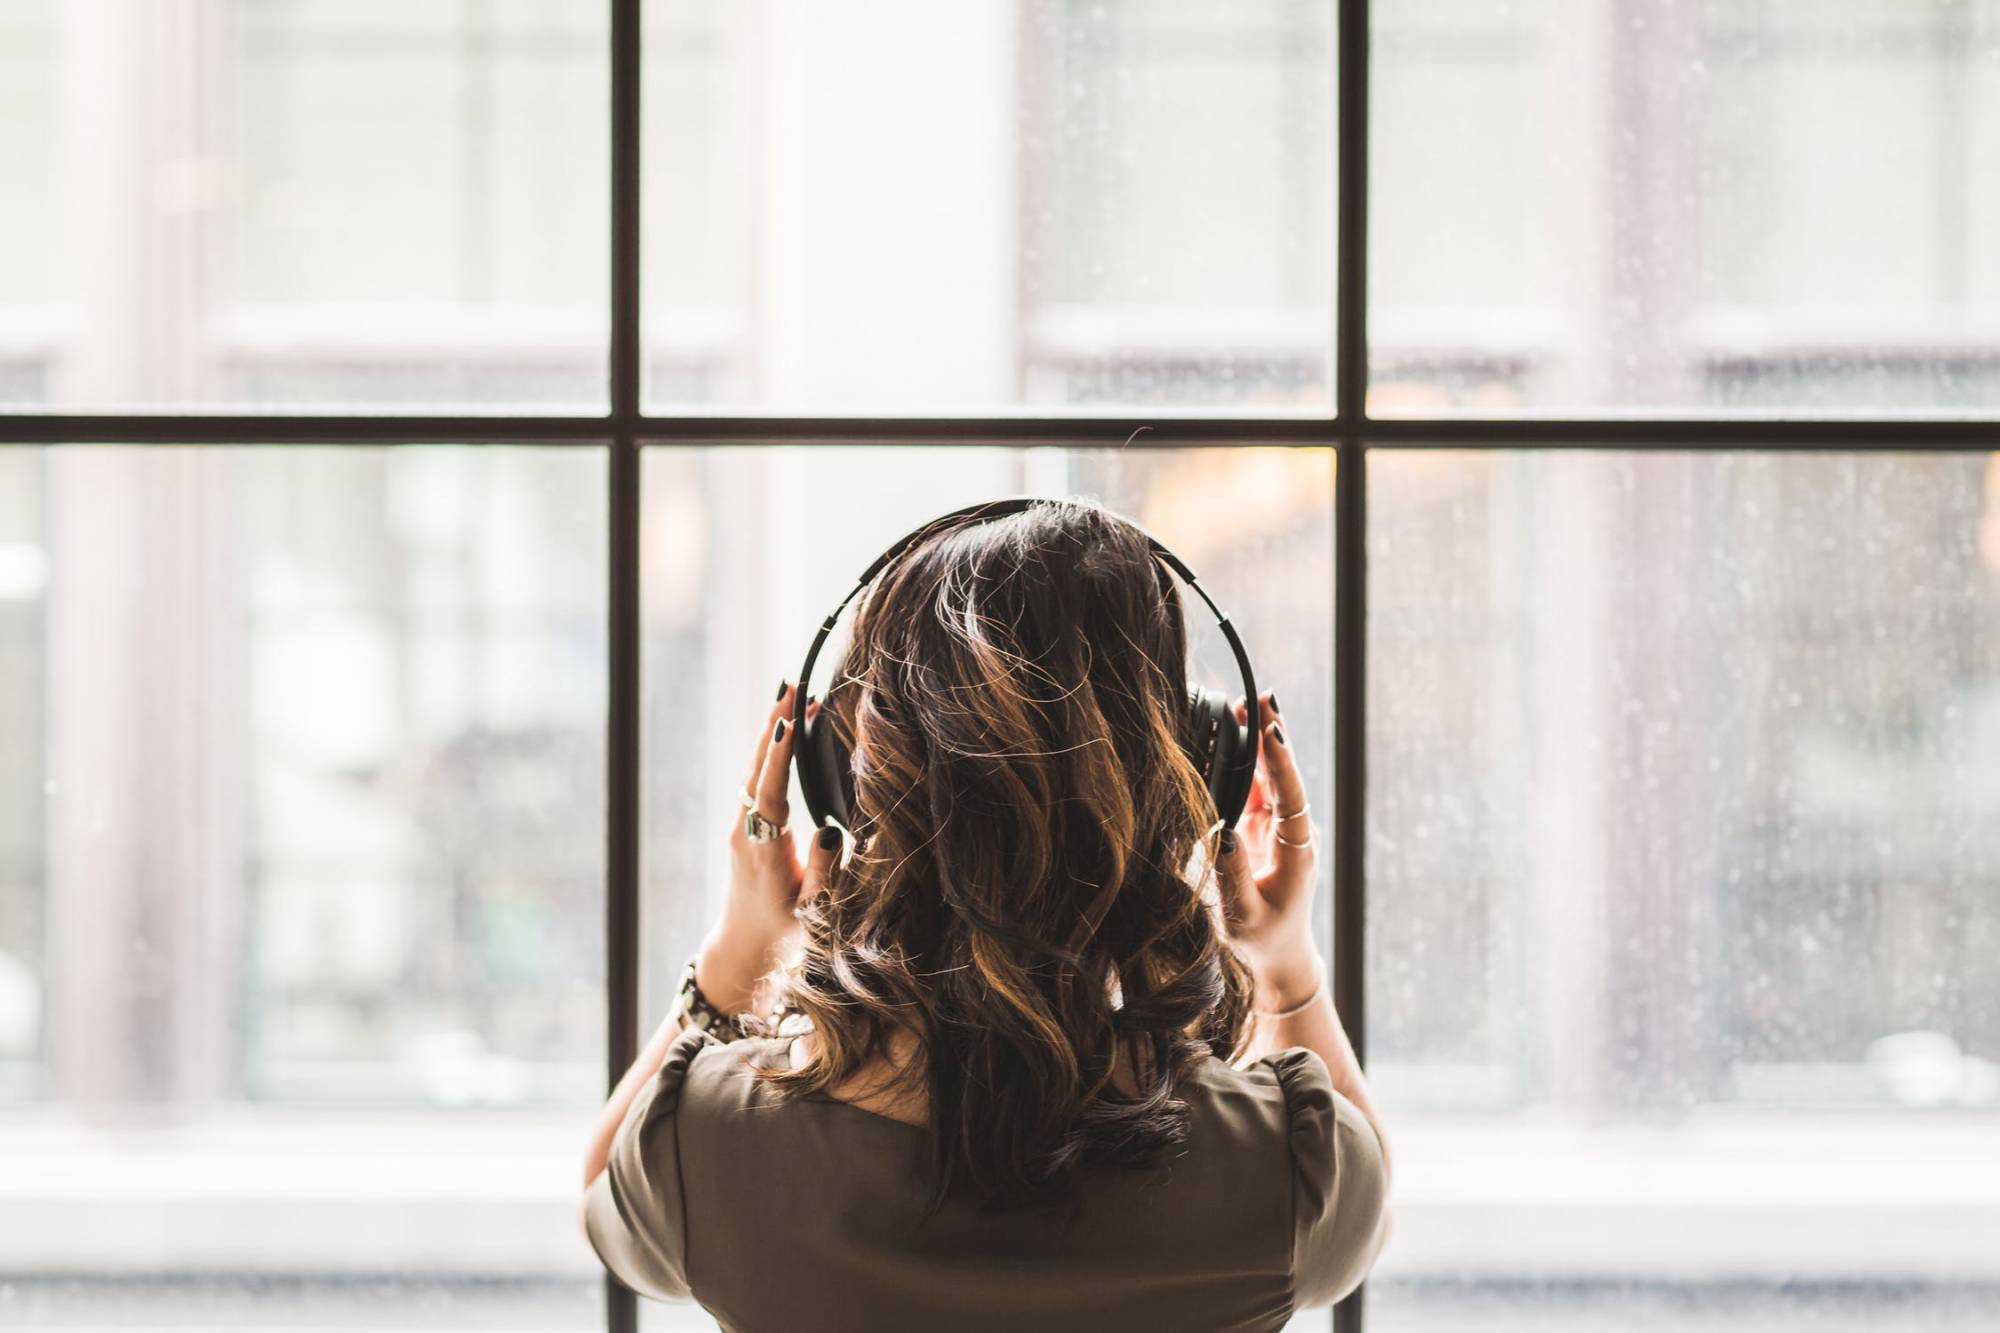 Photo of a woman staring out the window with headphones on